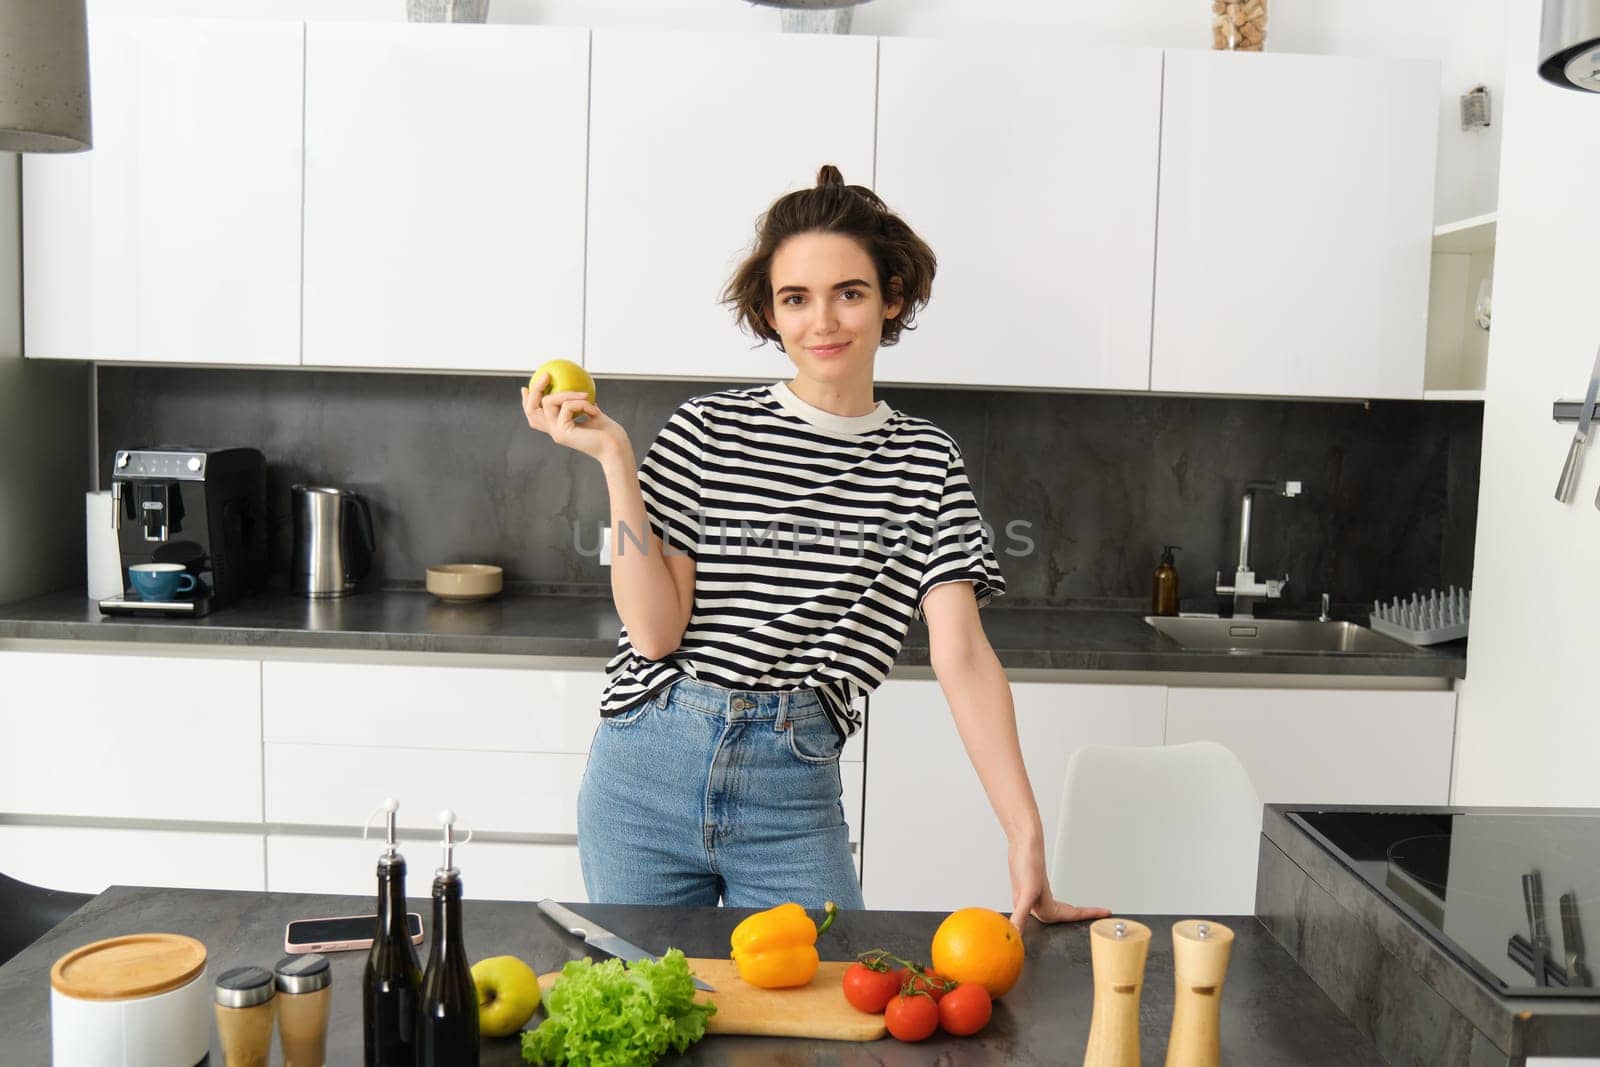 Portrait of beautiful, confident smiling woman, posing near kitchen counter with vegetables and chopping board, holding apple, cooking meal, preparing a salad.